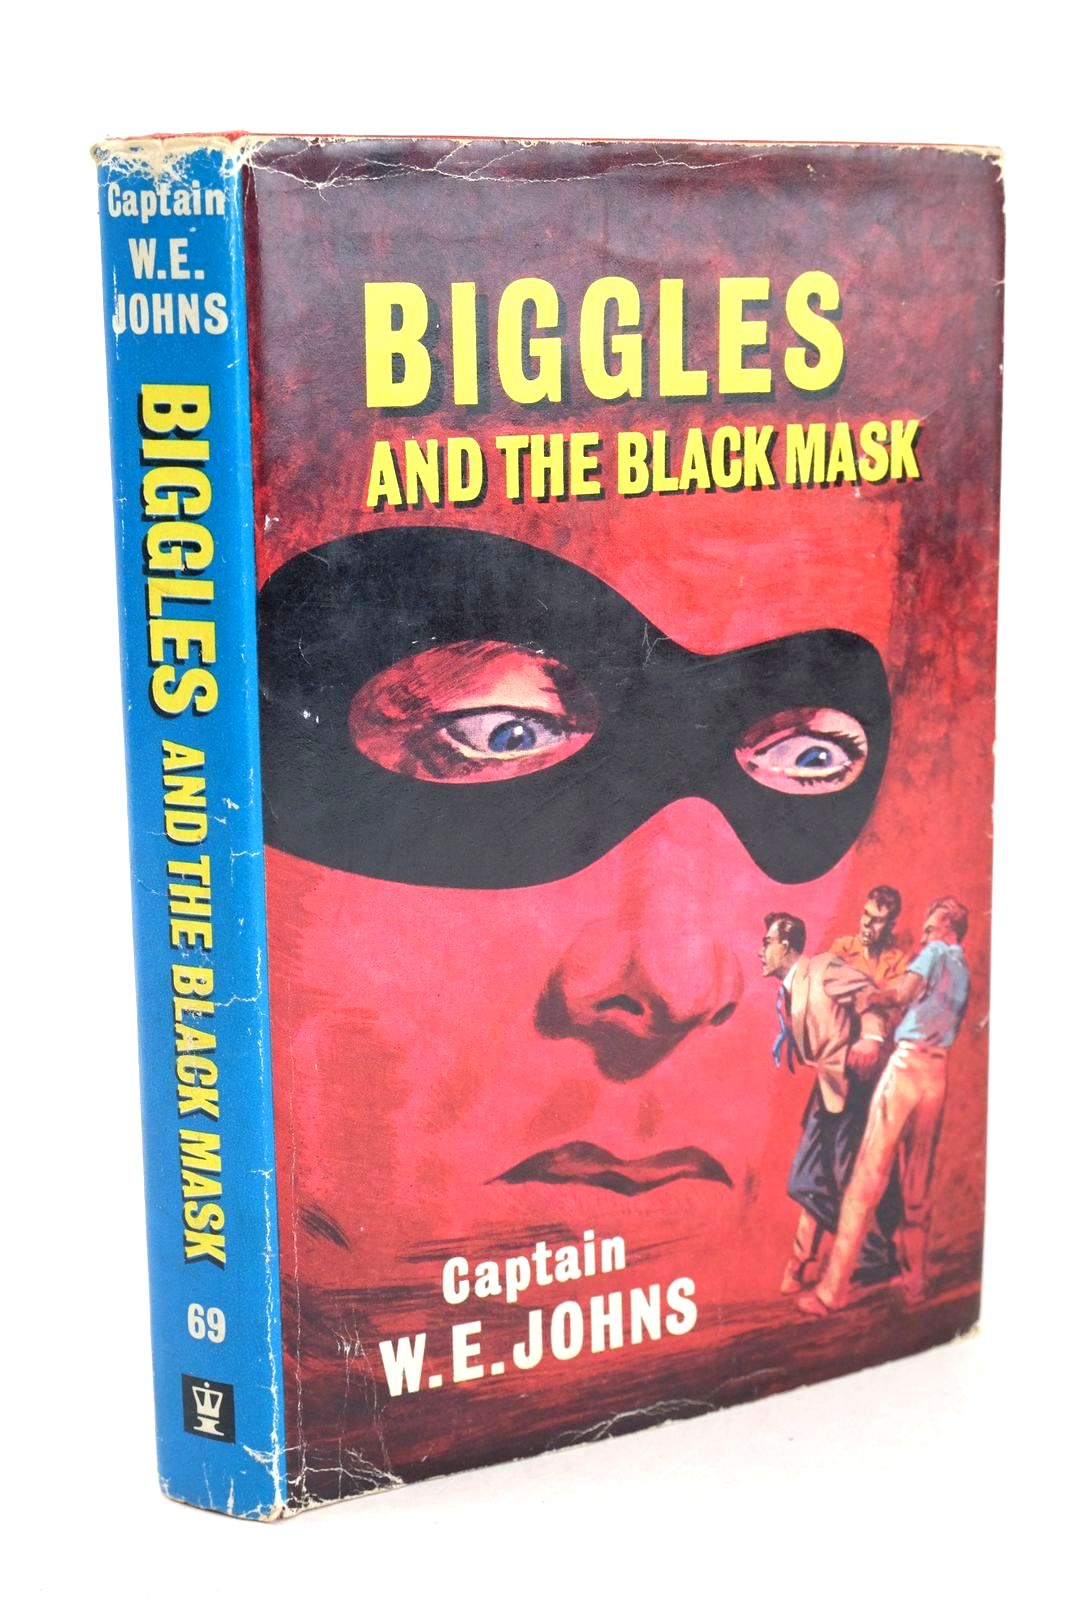 Photo of BIGGLES AND THE BLACK MASK written by Johns, W.E. illustrated by Stead,  published by Hodder &amp; Stoughton (STOCK CODE: 1326033)  for sale by Stella & Rose's Books